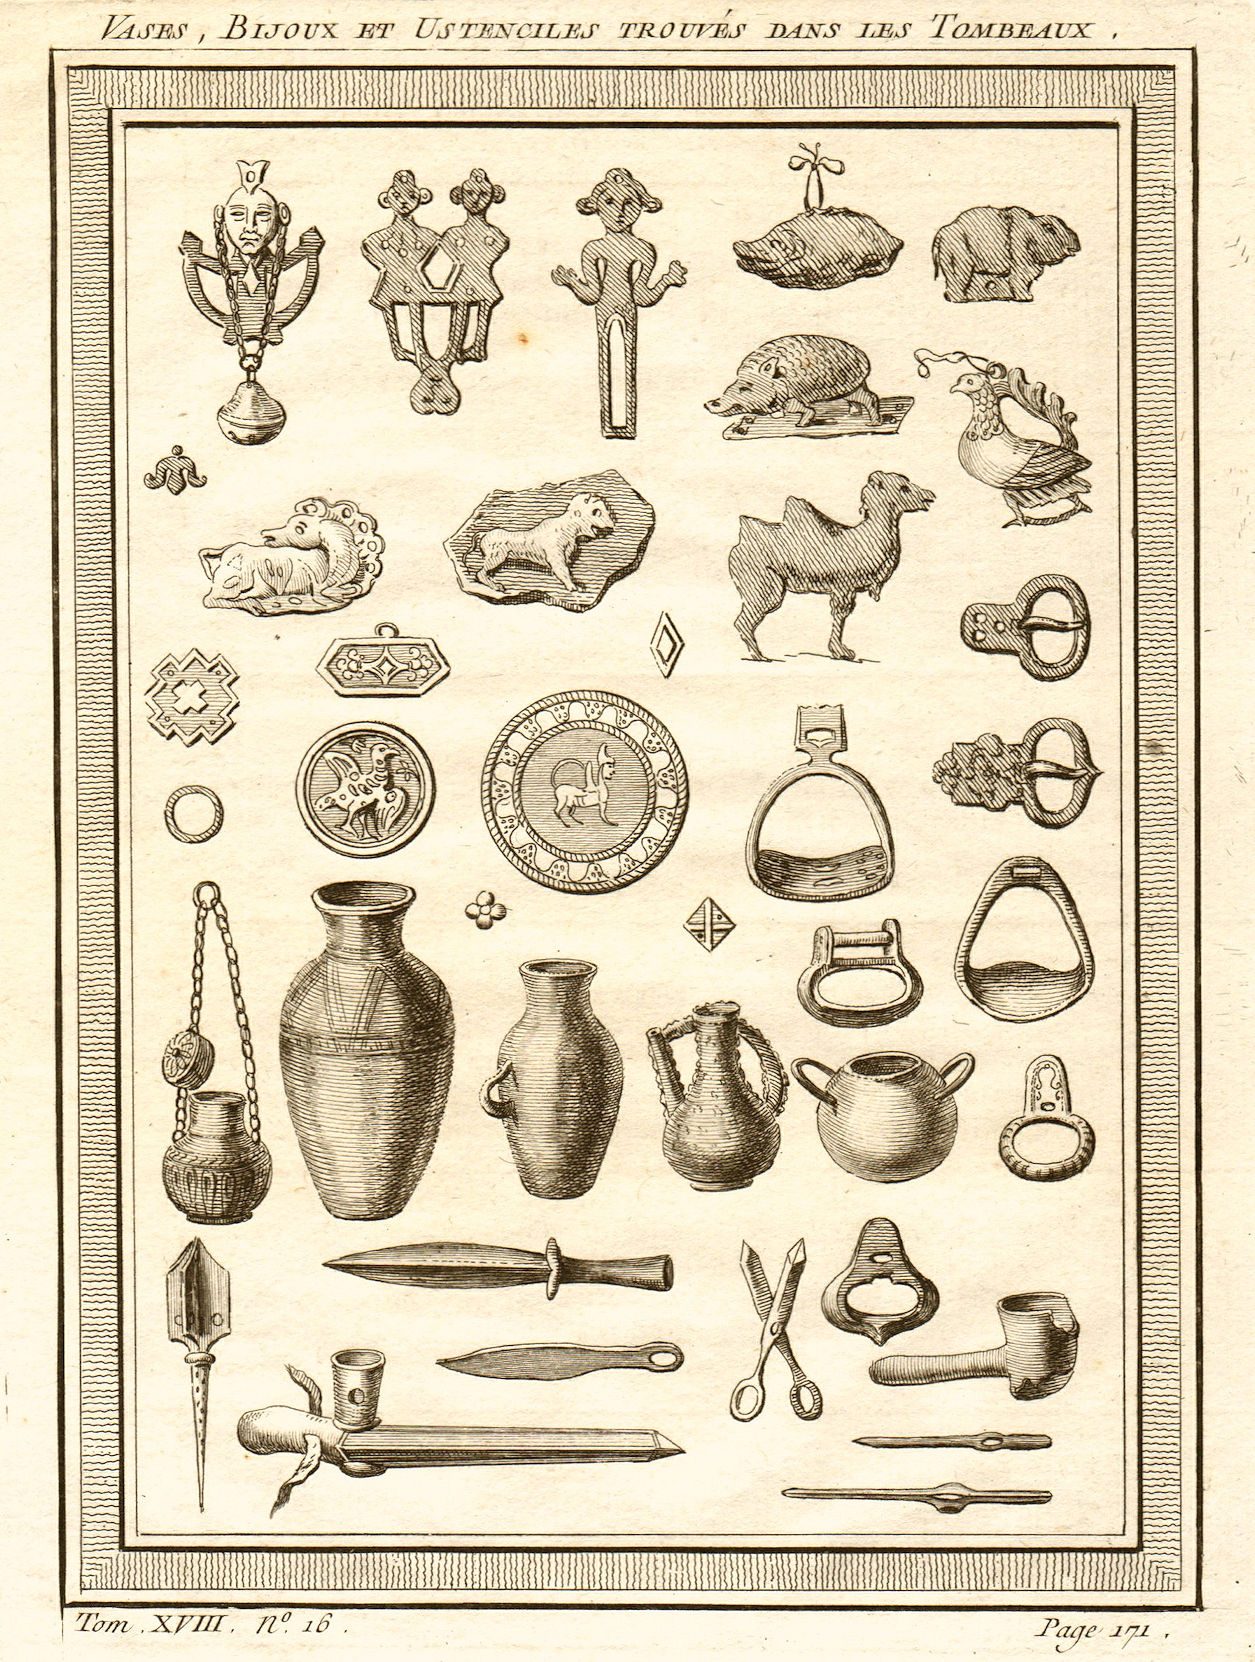 Associate Product Vases, jewellery and tools found in Krasnoyarsk megaliths, Russia 1768 print